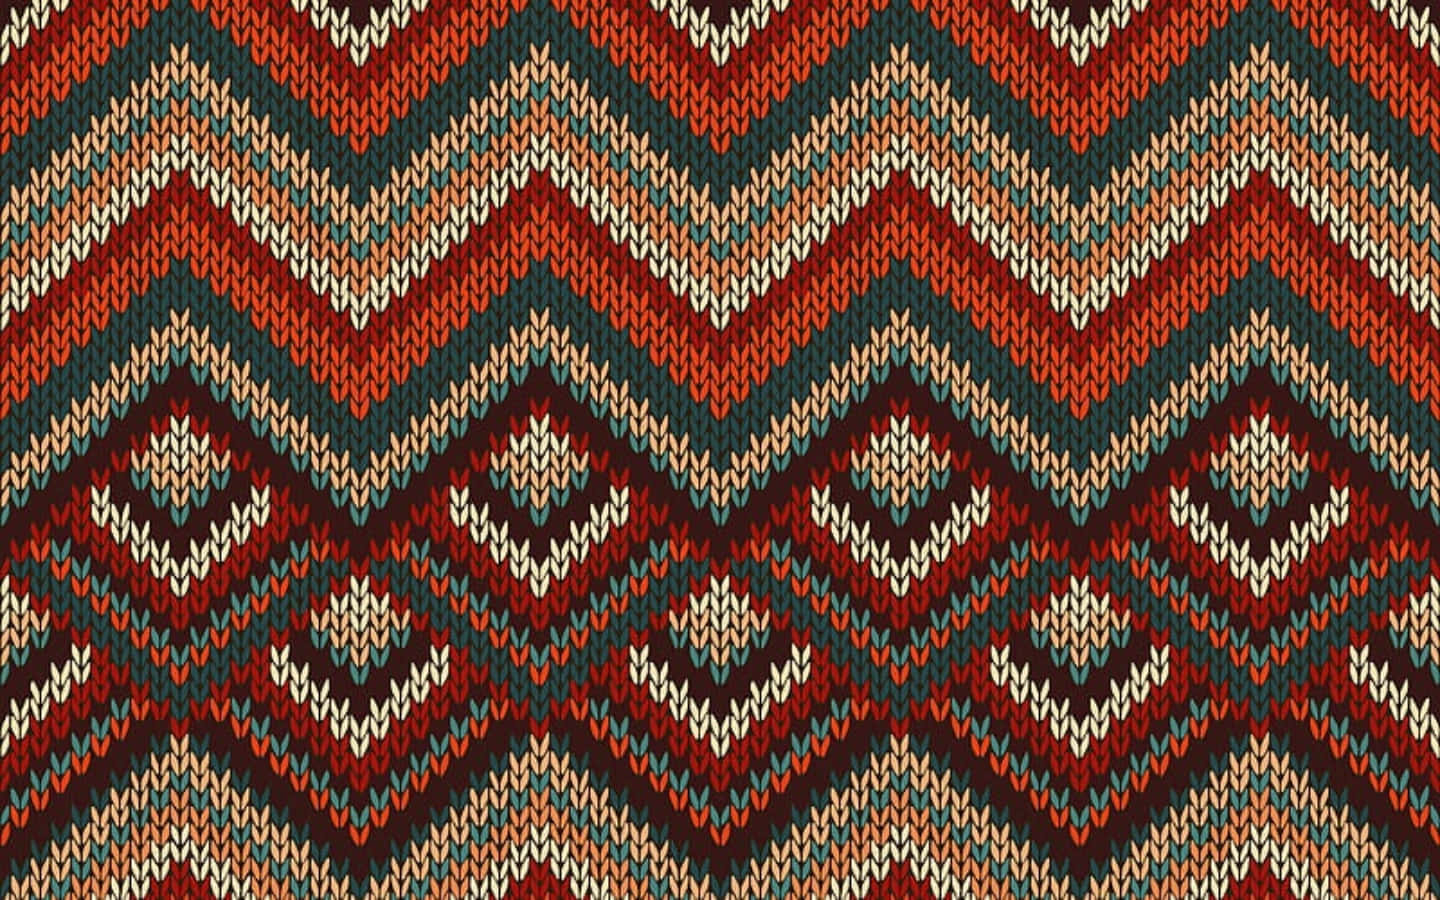 Fabric Texture Pictures Geometrical Pattern Brown